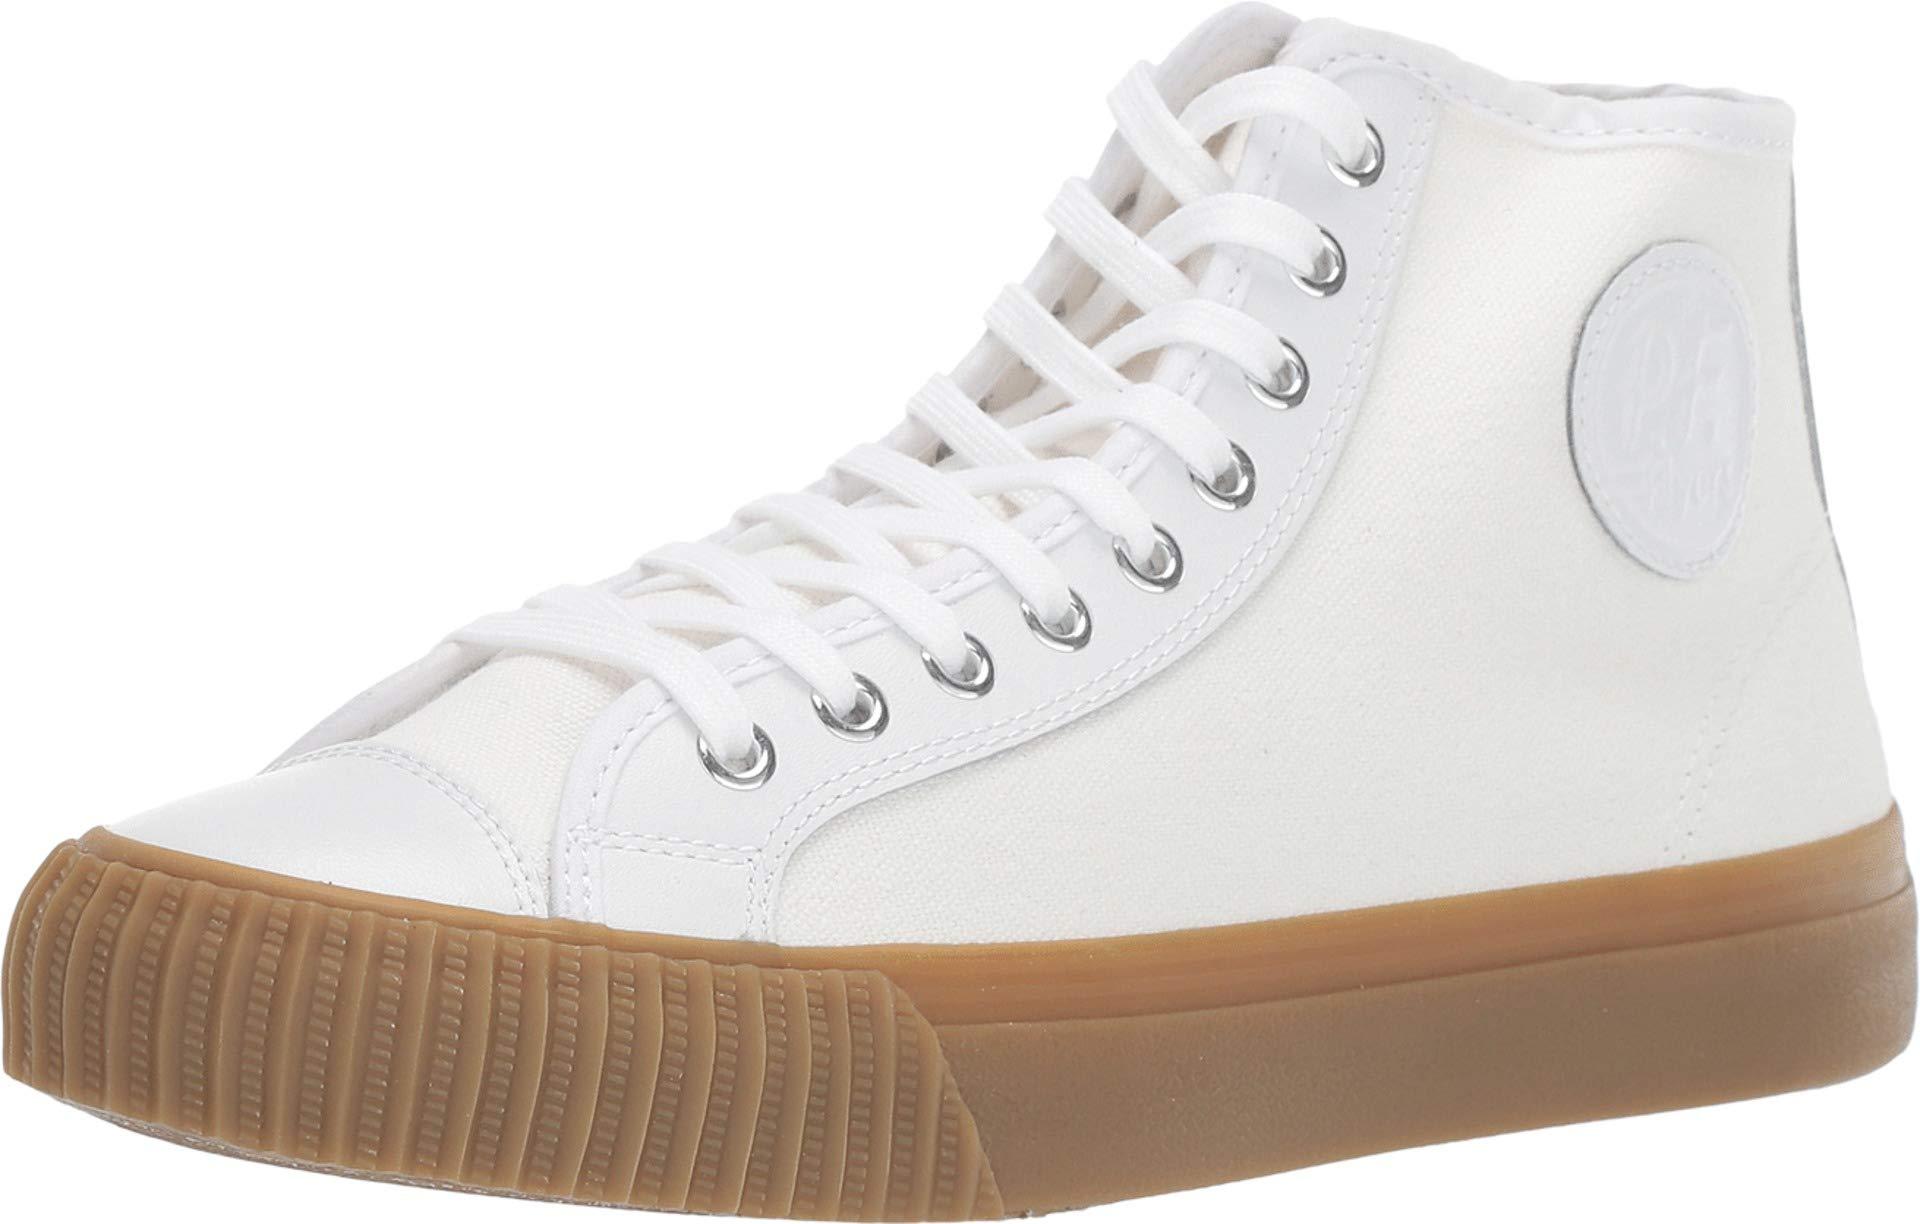 PF Flyers Leather Center Hi in White for Men - Lyst